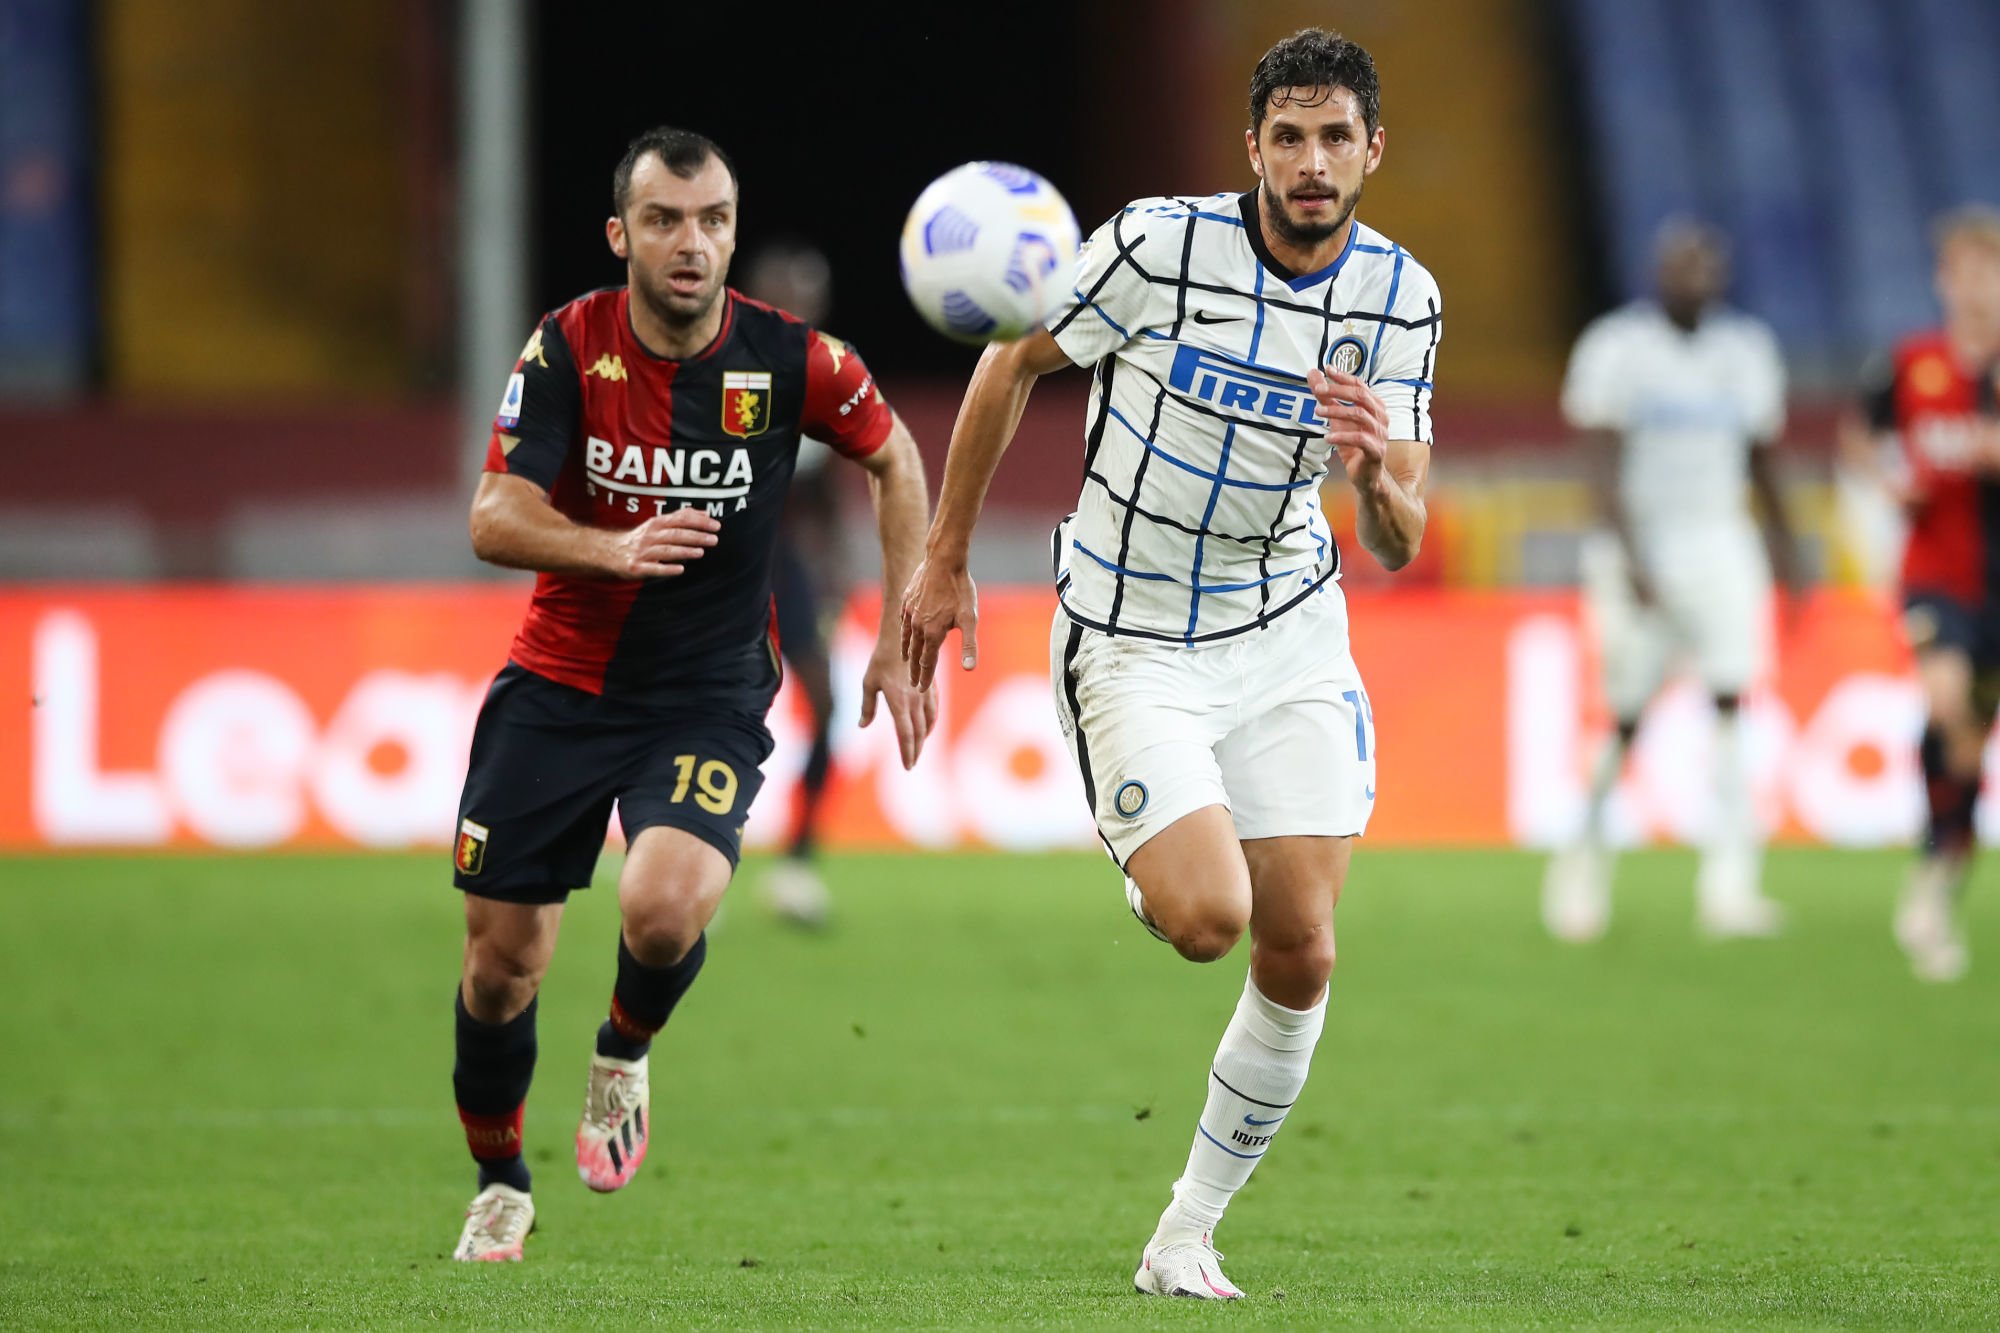 Andrea Ranocchia of Internazionale and /g19 race after the ball during the Serie A match at Luigi Ferraris, Genoa. Picture date: 24th October 2020. Picture credit should read: Jonathan Moscrop/Sportimage 
By Icon Sport - Stadio Comunale Luigi Ferraris - Genes (Italie)